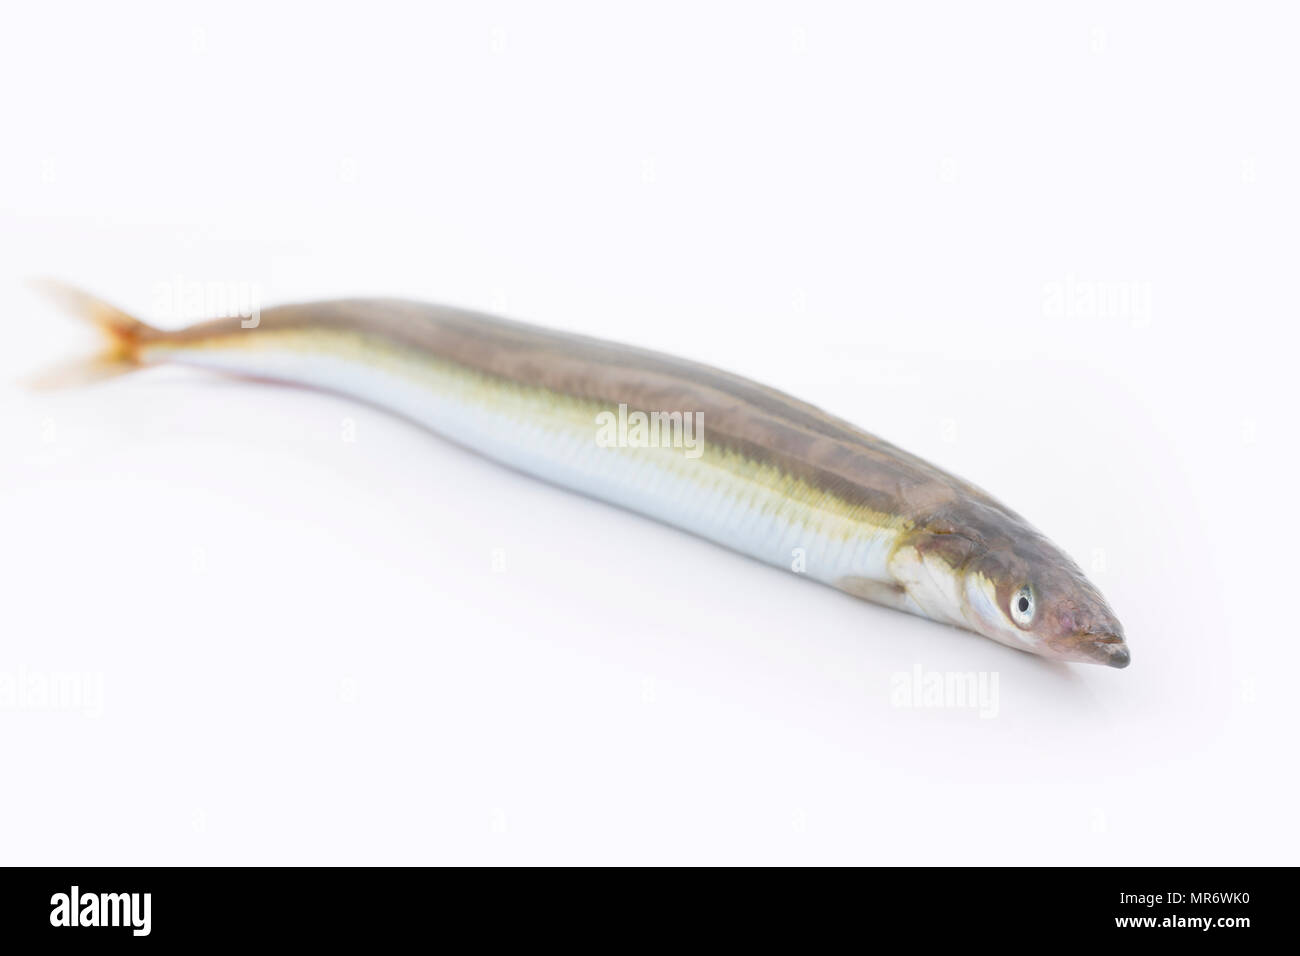 https://c8.alamy.com/comp/MR6WK0/a-sand-eel-or-greater-launce-hyperoplus-lanceolatus-caught-on-mackerel-feathers-while-shore-fishing-on-chesil-beach-near-the-isle-of-portland-dorse-MR6WK0.jpg